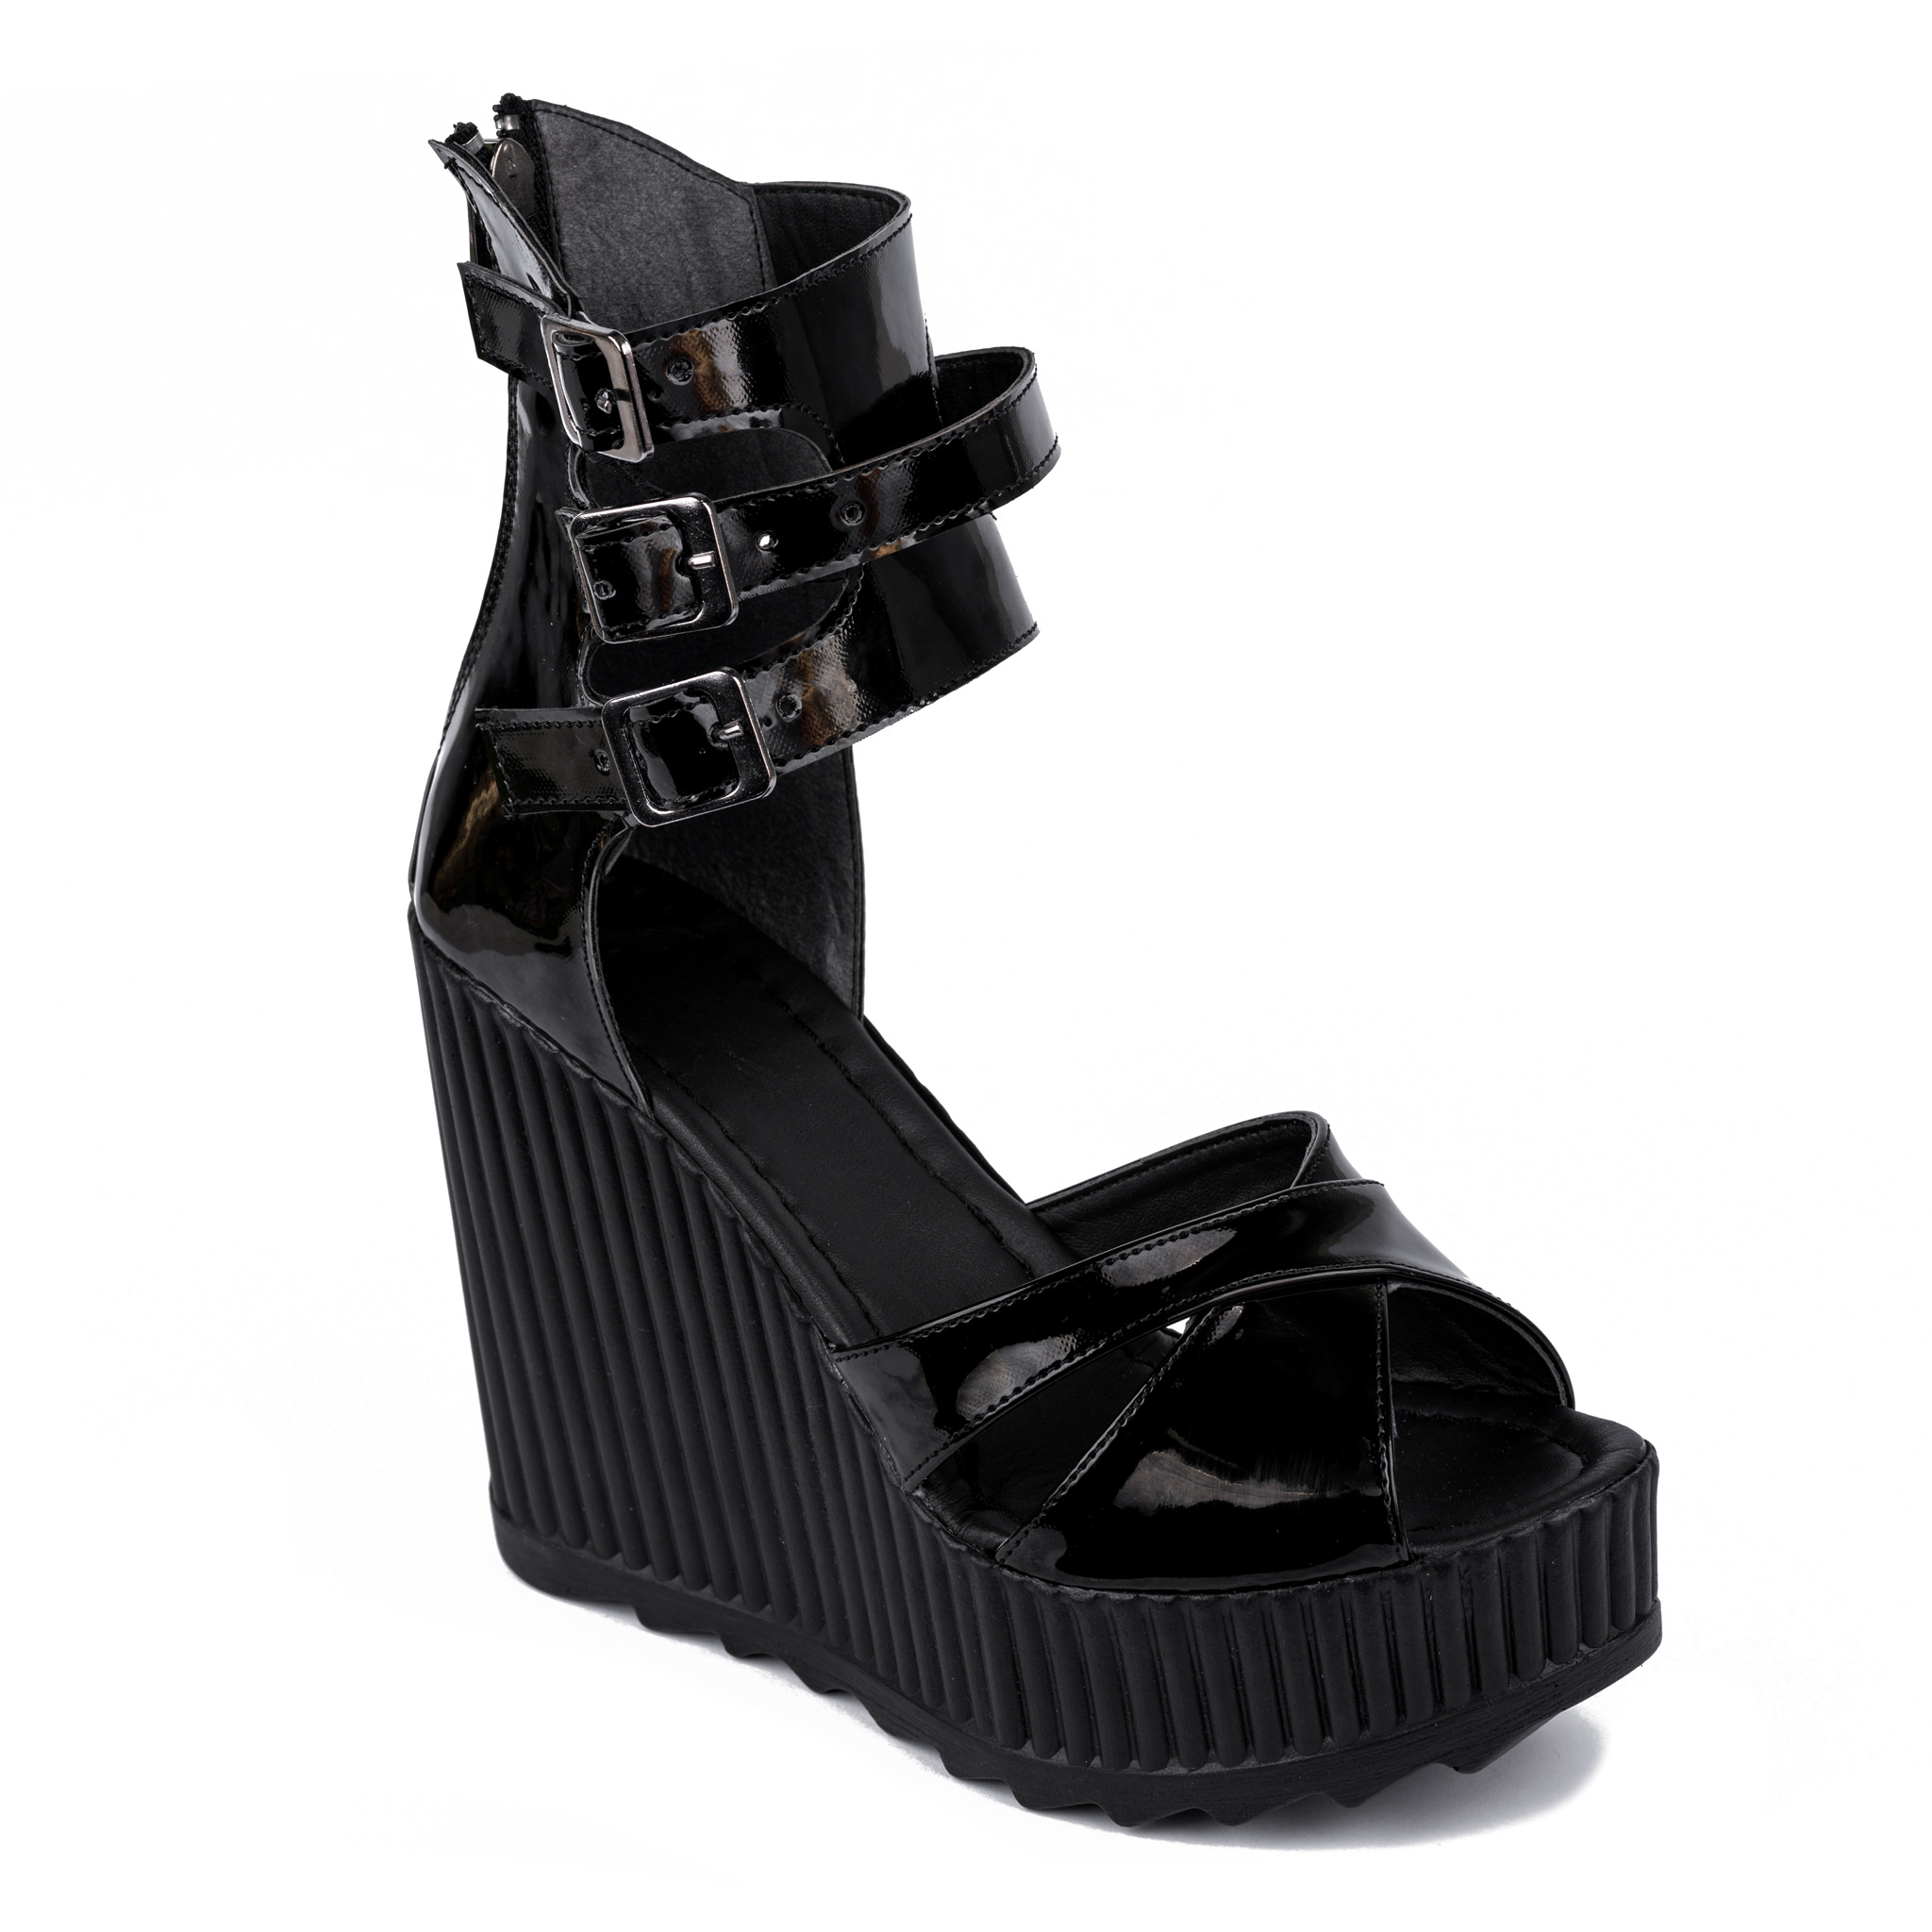 PATENT WEDGE SANDALS WITH BELTS - BLACK